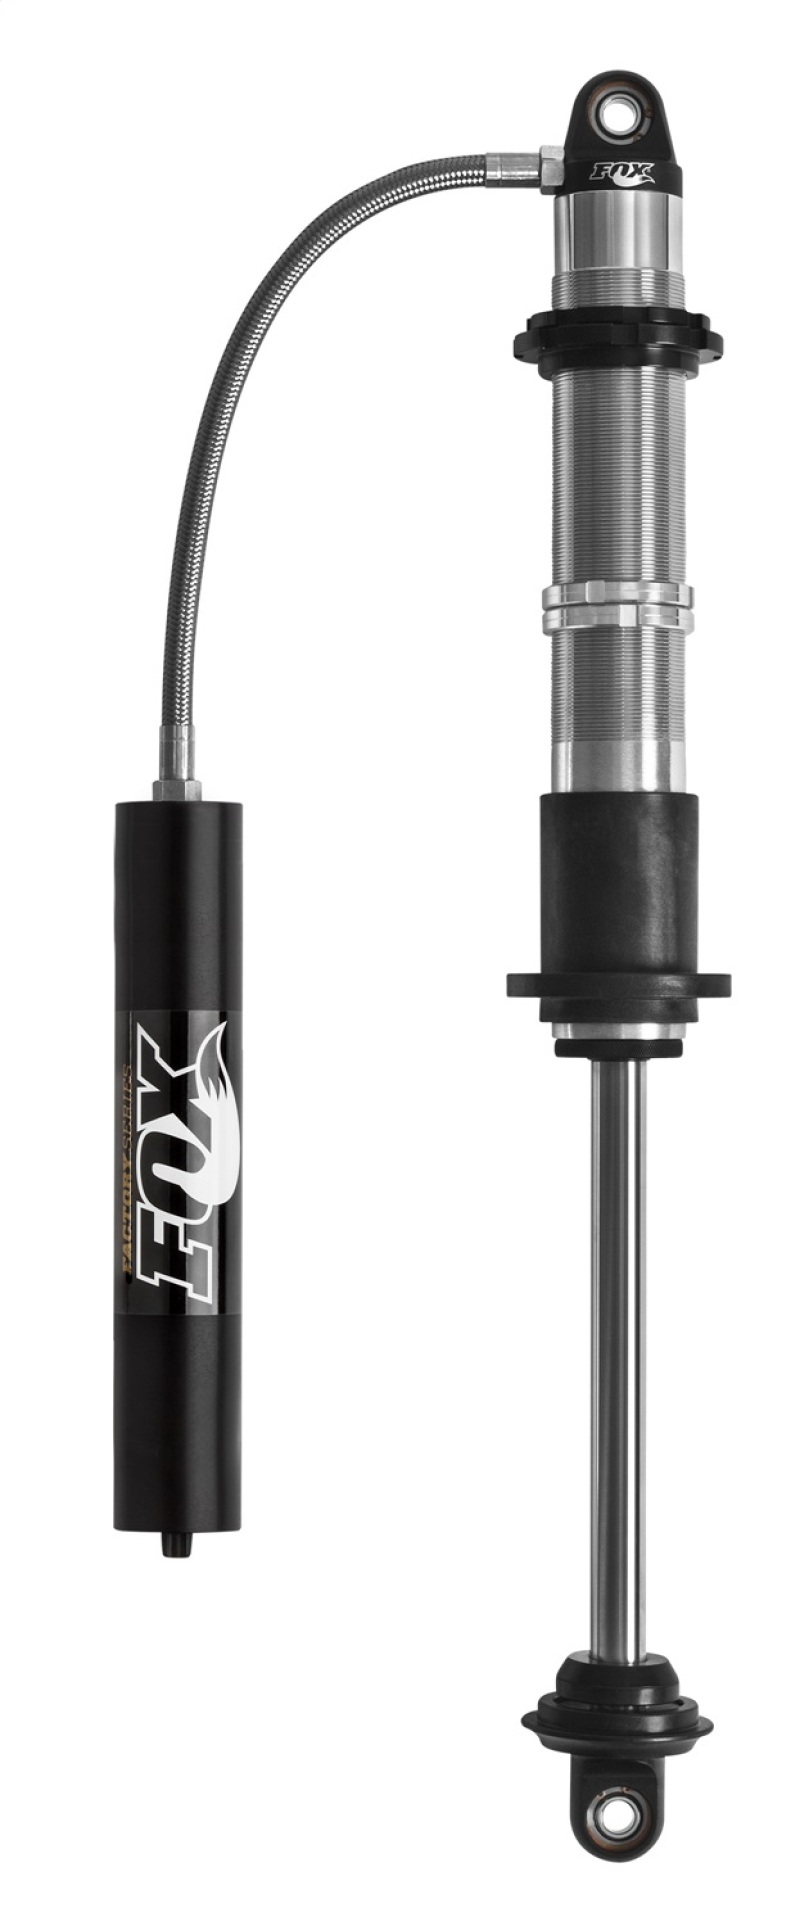 Fox 2.0 Factory Series 10in. Remote Reservoir Coilover Shock 5/8in. Shaft (40/60 Valving) - Blk - 980-02-005